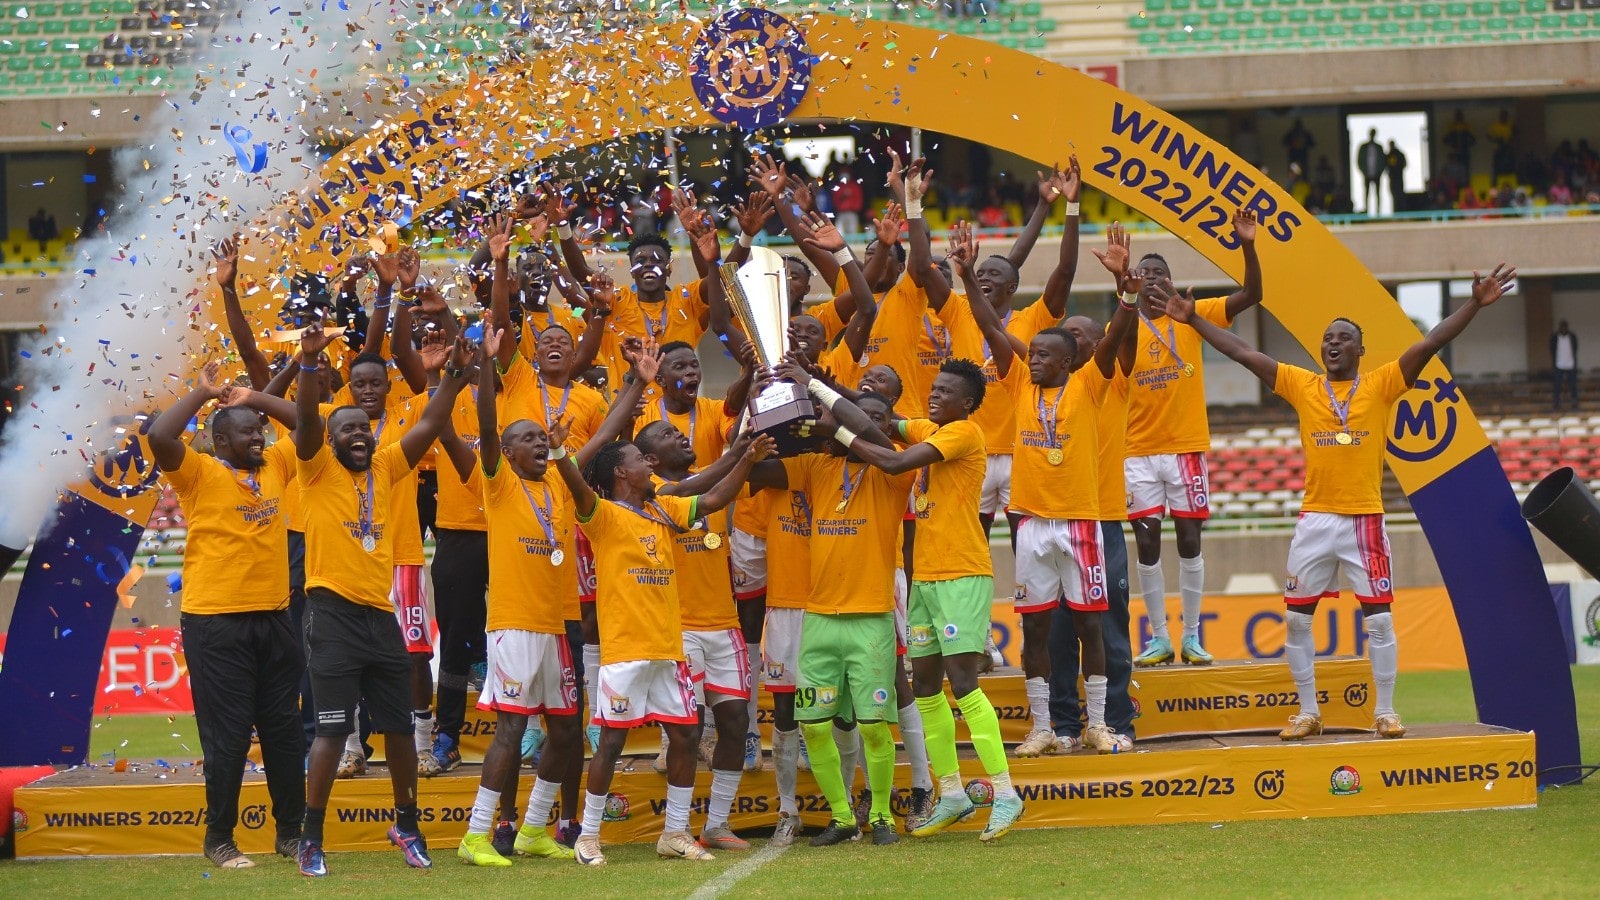 FKF Cup action resumes with Round of 16 fixtures